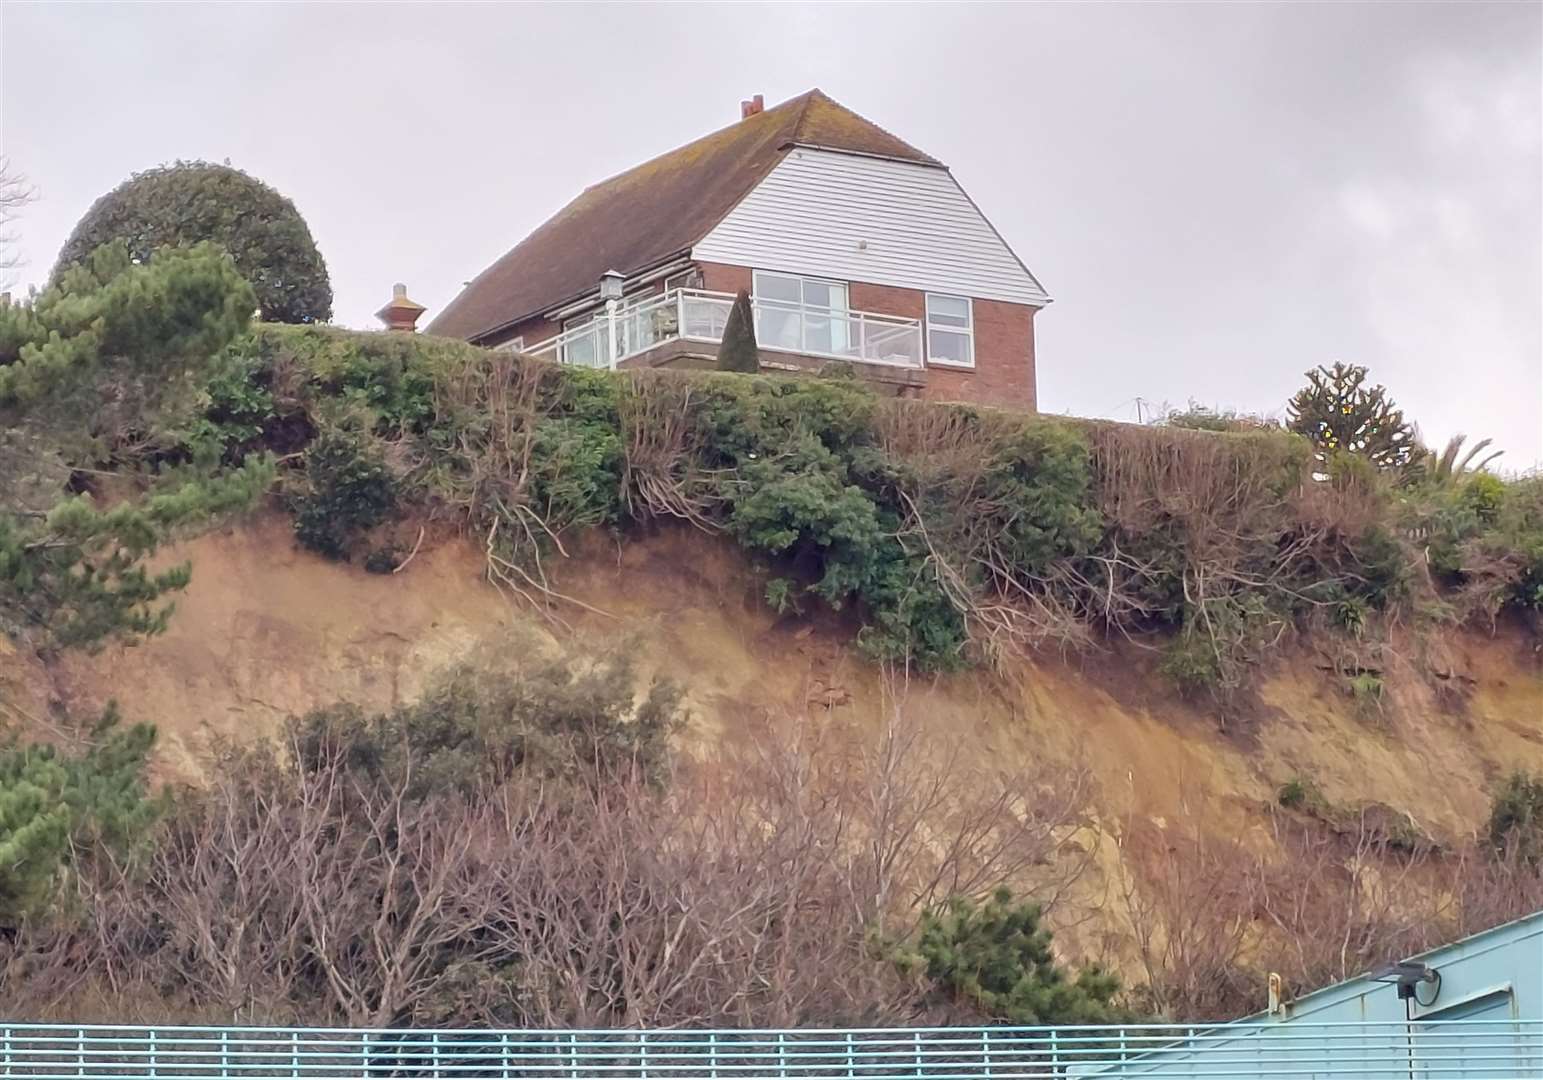 The landslip happened on the Road of Remembrance, Folkestone this afternoon